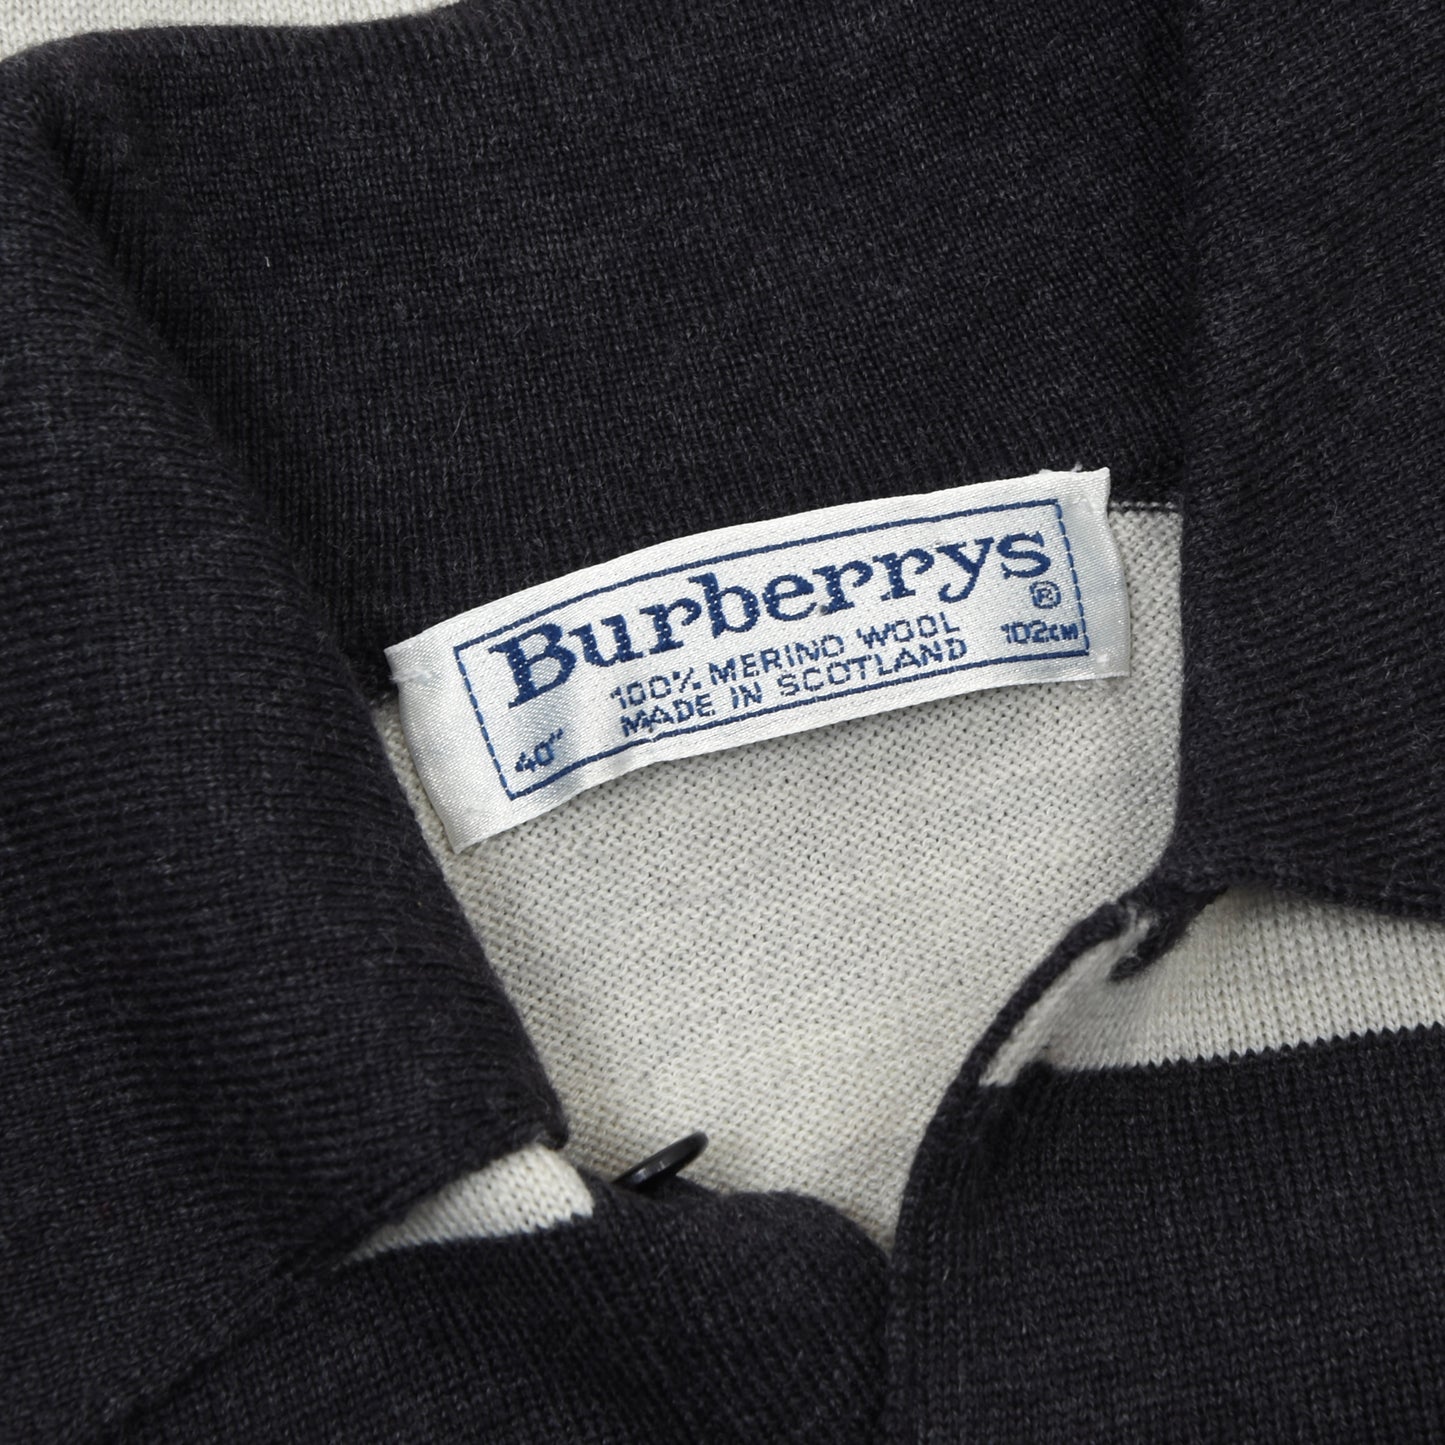 Vintage Burberrys 100% Wool Sweater Size 40"/102cm Chest ca. 56cm - Striped